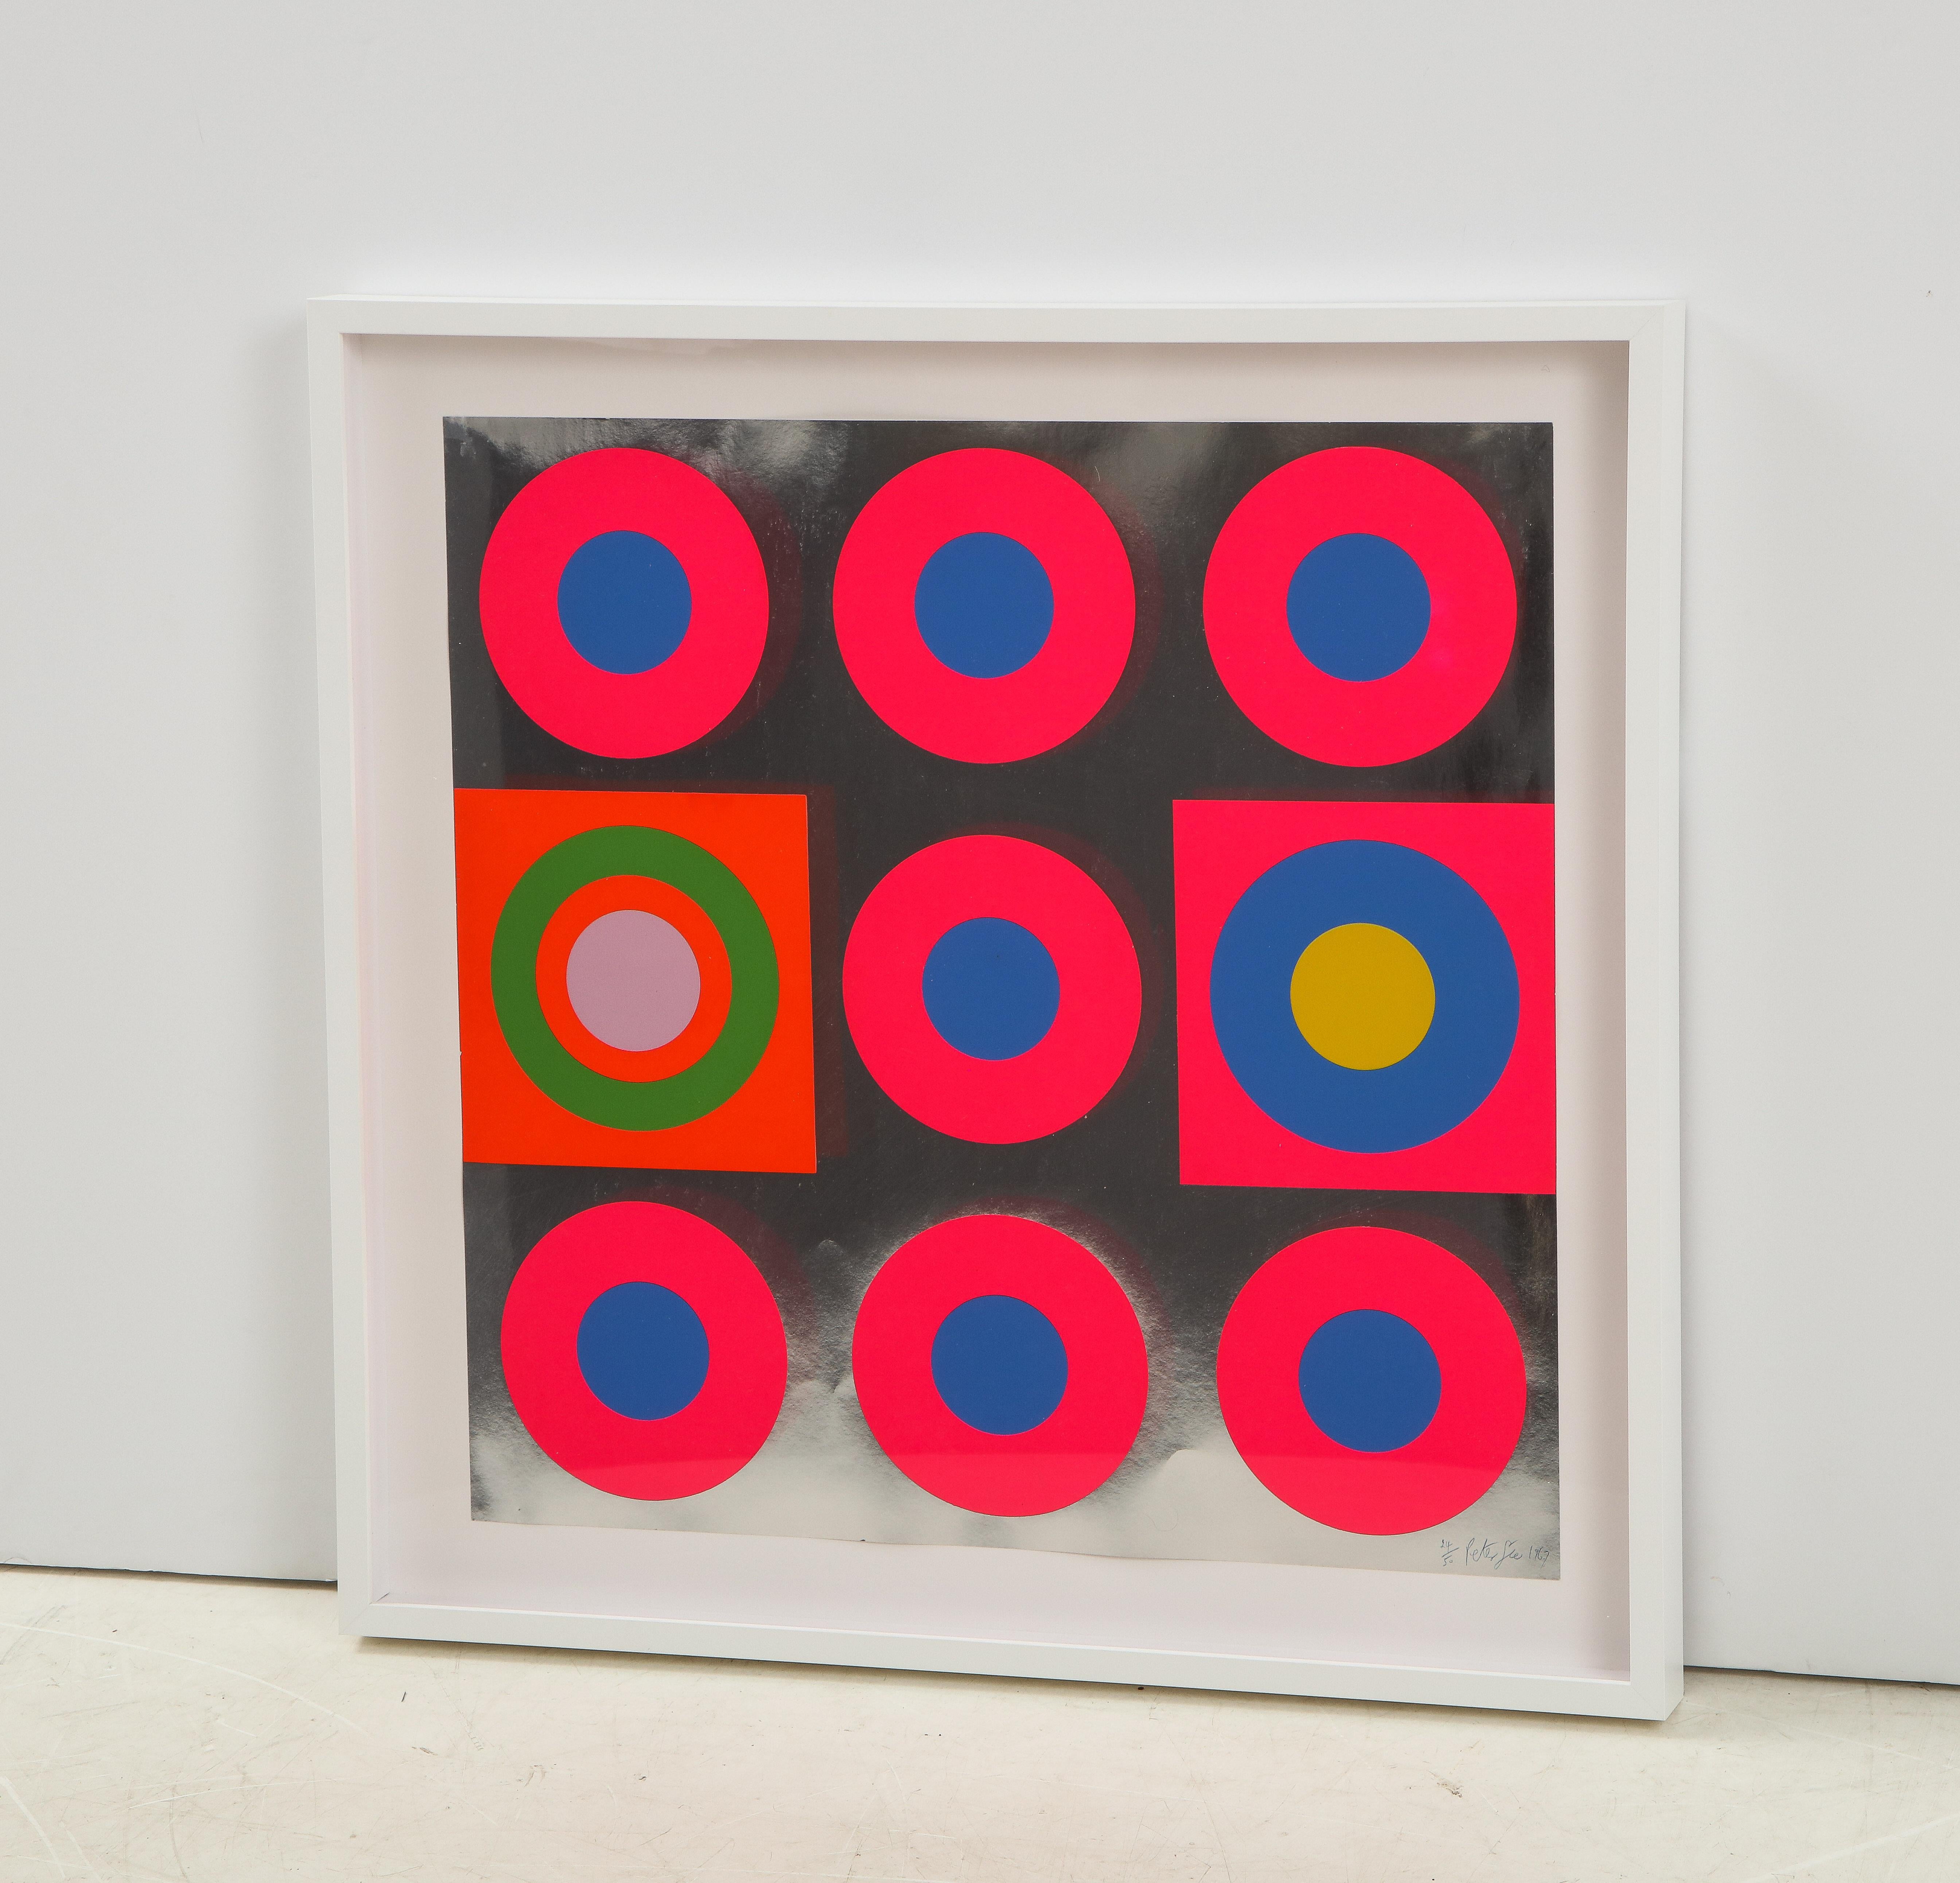 Pop Art screen-print on silver metallic board featuring graphic magenta, blue, orange bullseye targets. Signed Peter Gee 1967. Professionally framed in a white wood frame with glare resistant Plexiglas protector. Numbered 24/50.